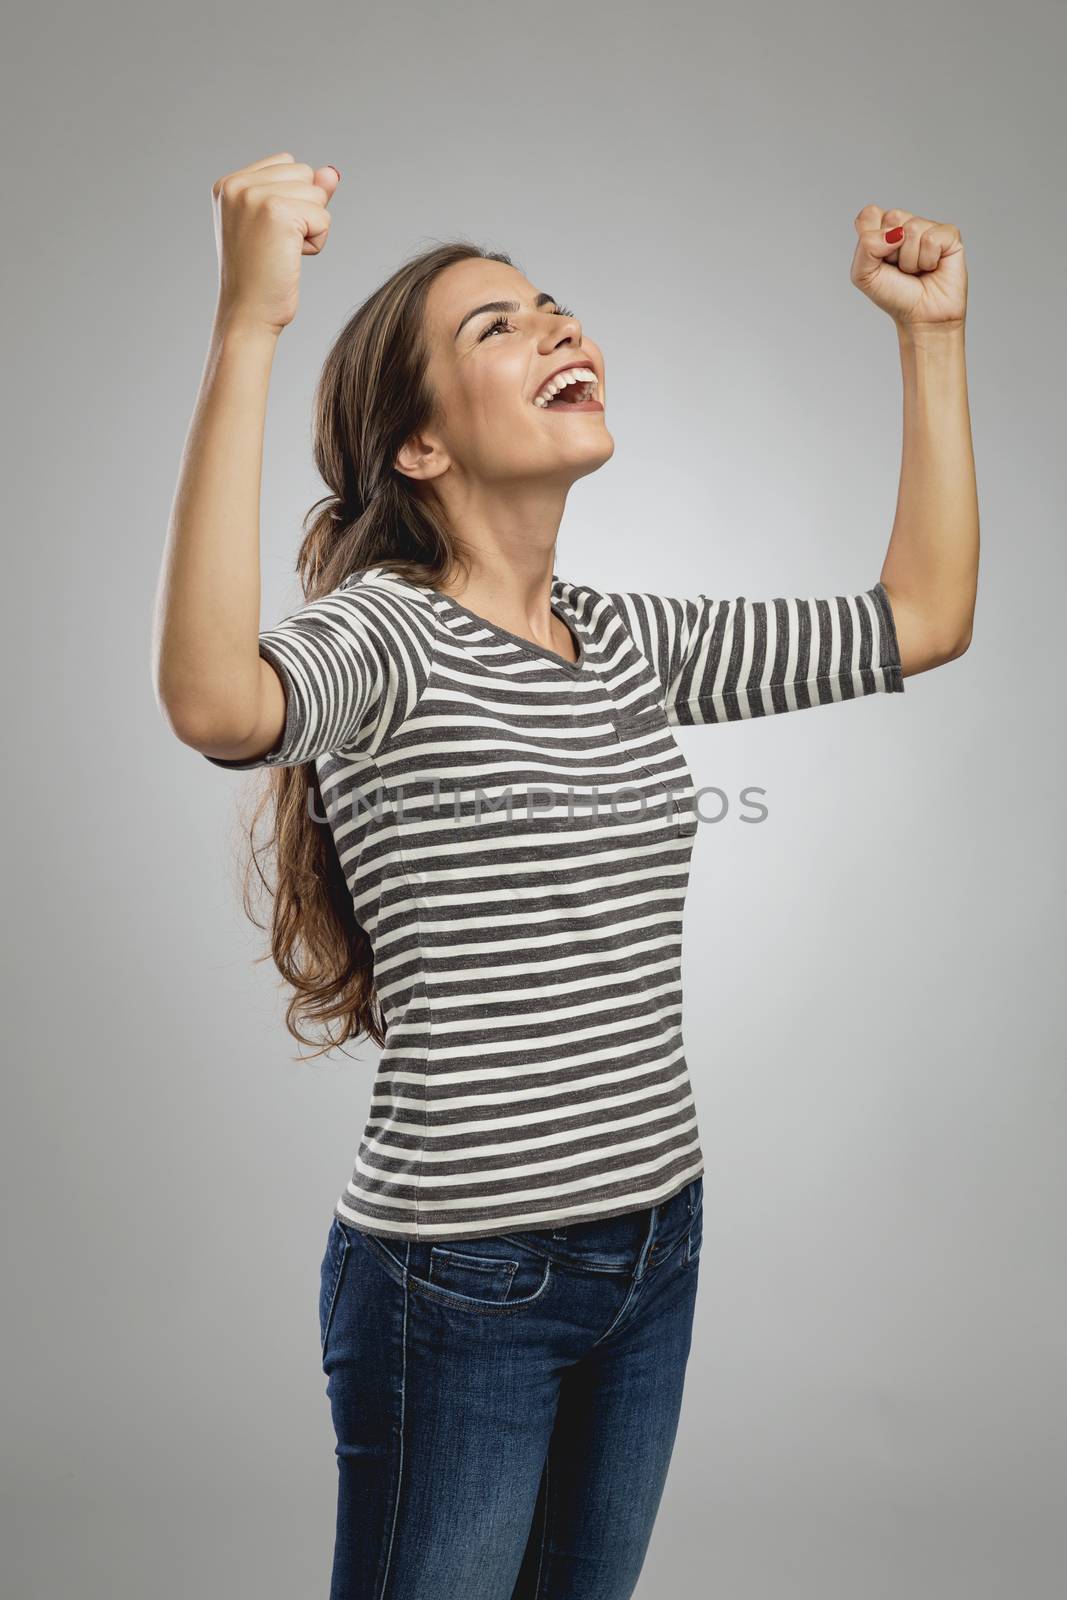 Portrait of a beautiful and successful young woman with raised arms